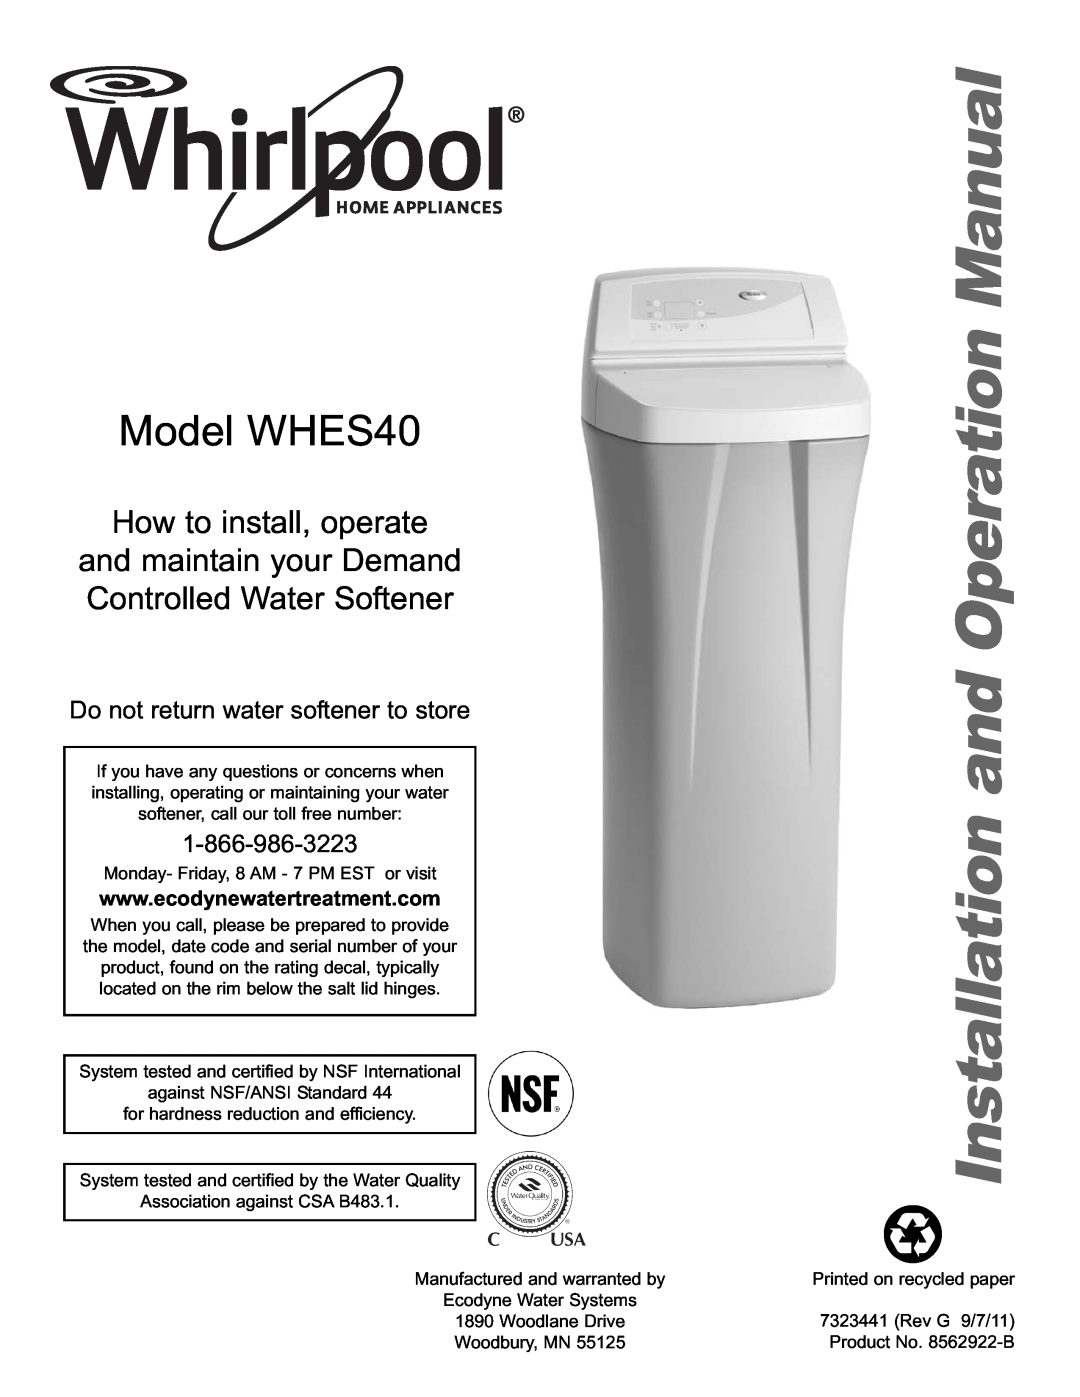 Whirlpool operation manual Do not return water softener to store, Model WHES40, How to install, operate 